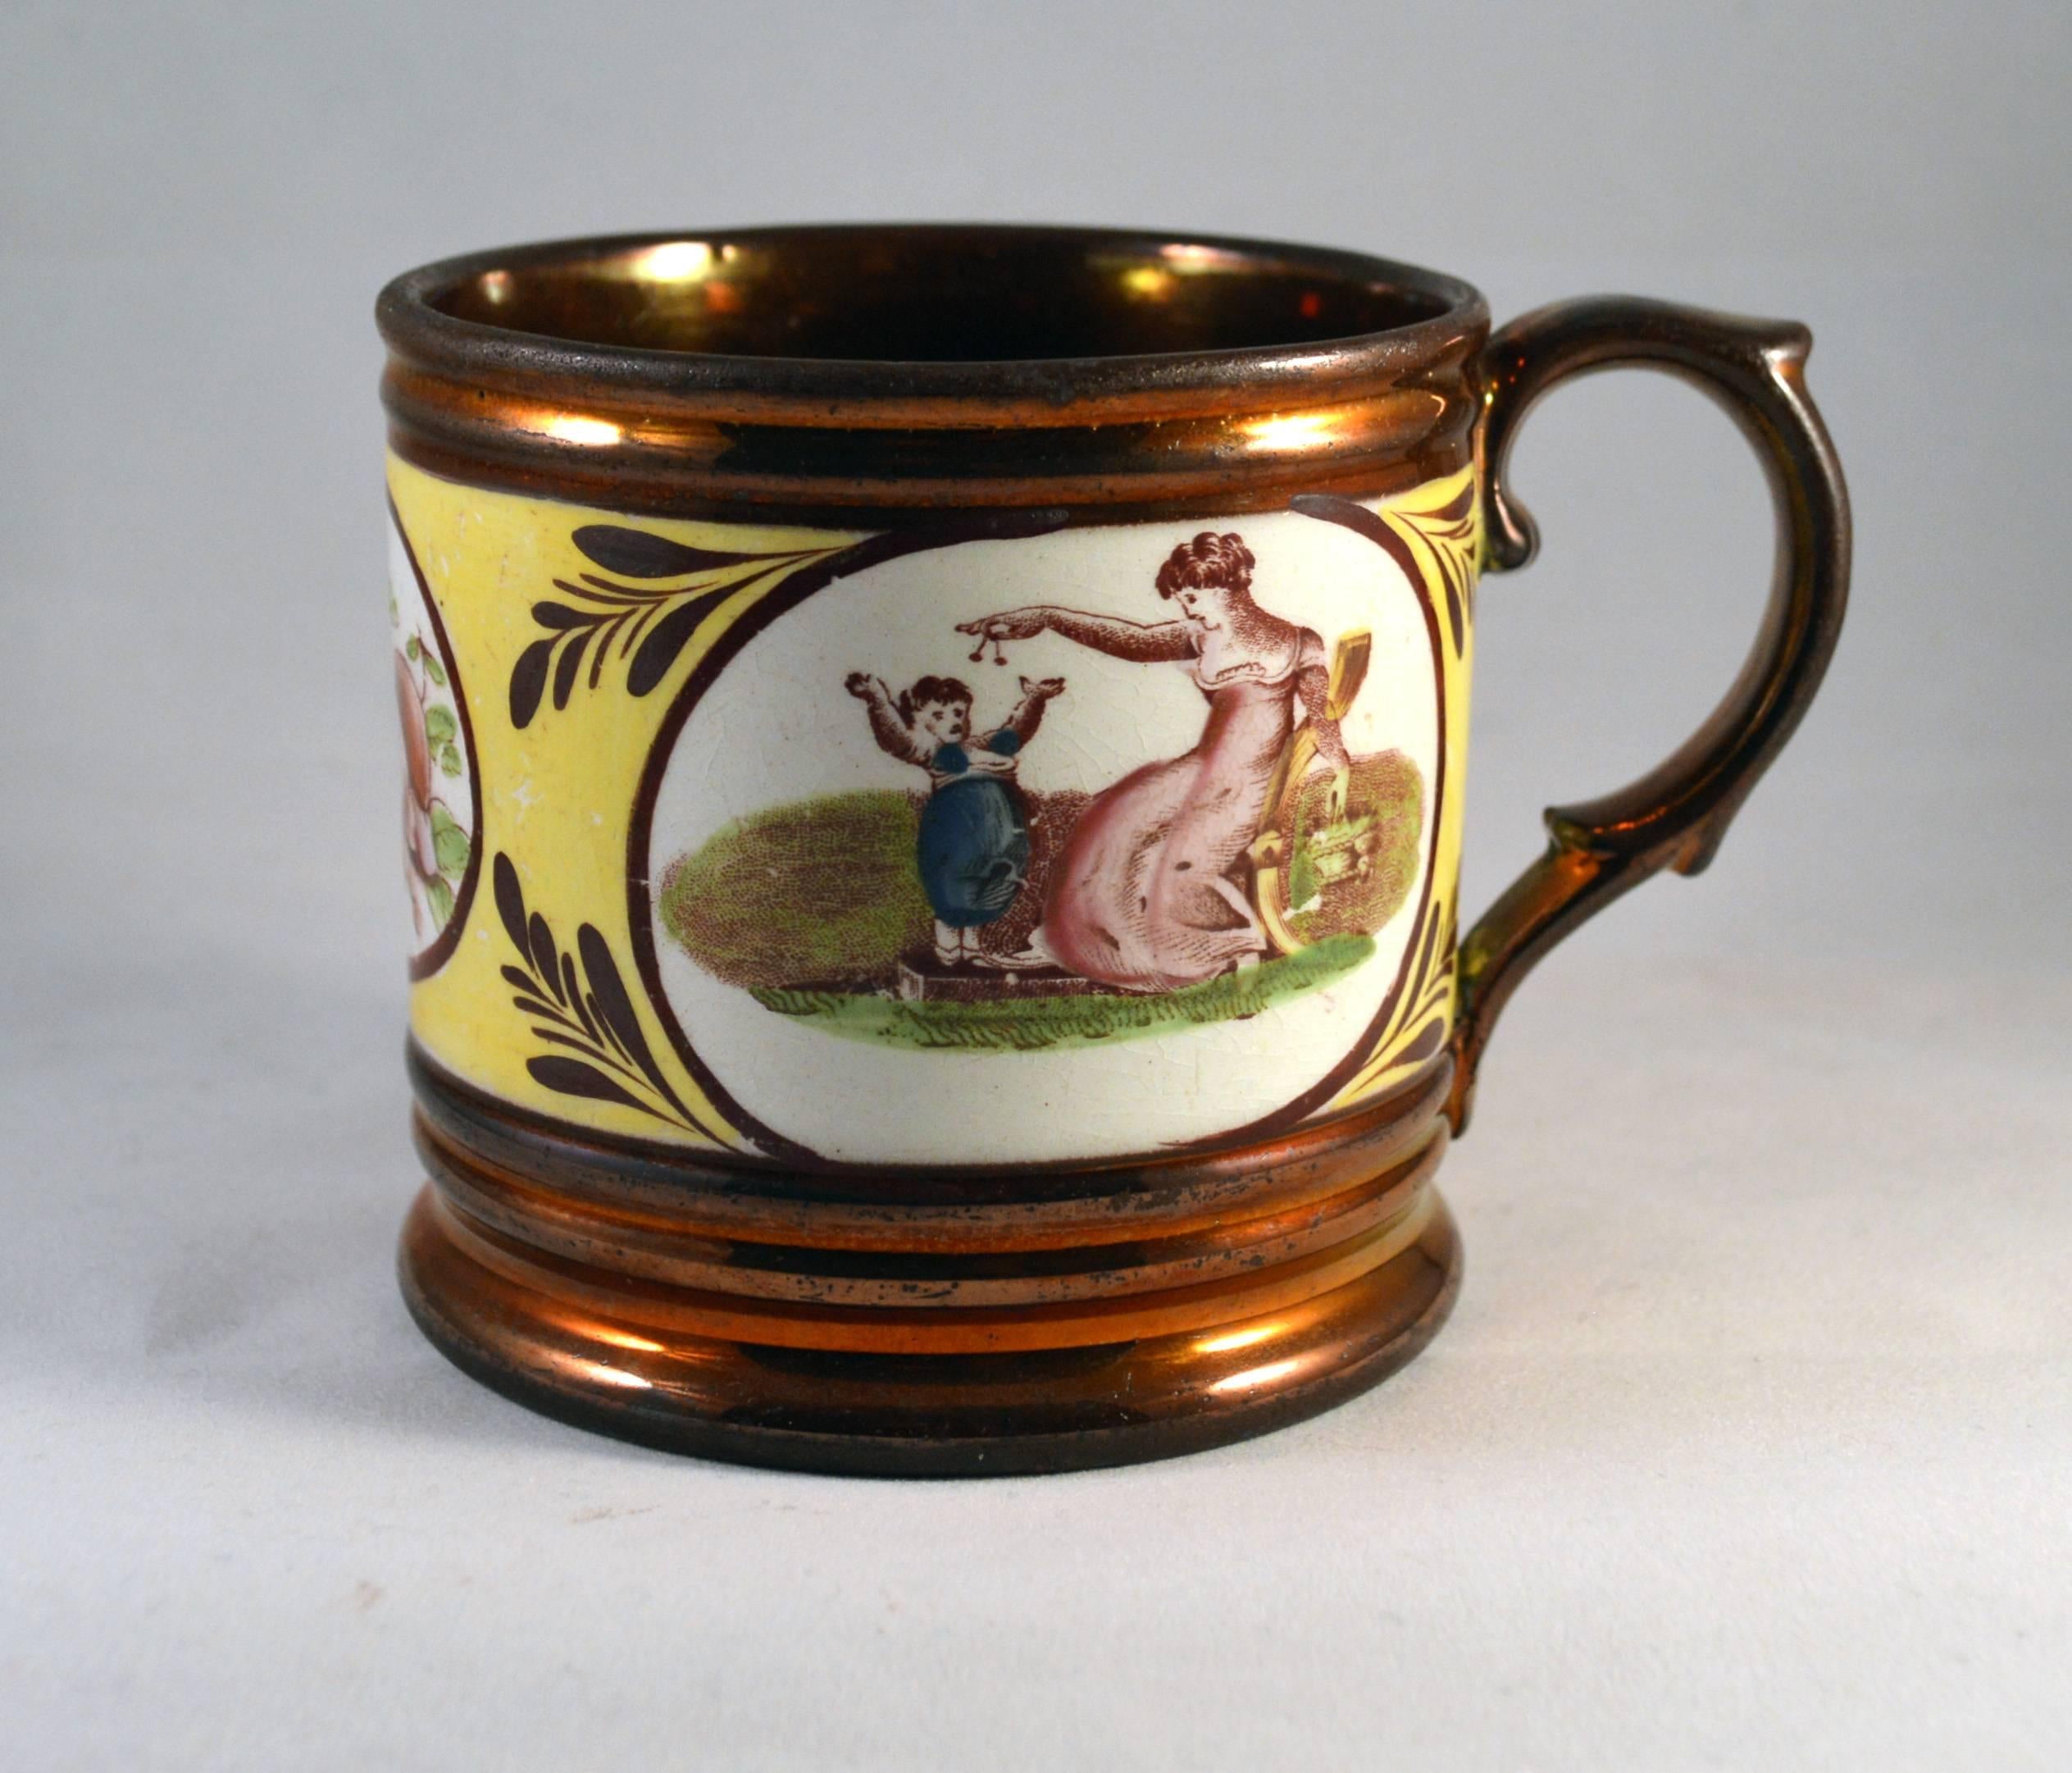 English pottery copper lustre (luster) and yellow mug with panels of Adam Buck figures and one of fruit,
Probably Enoch wood,
circa 1810-1930.

The lustre mug has reeded, moulded bands to the top border and the foot. The centre with a wide